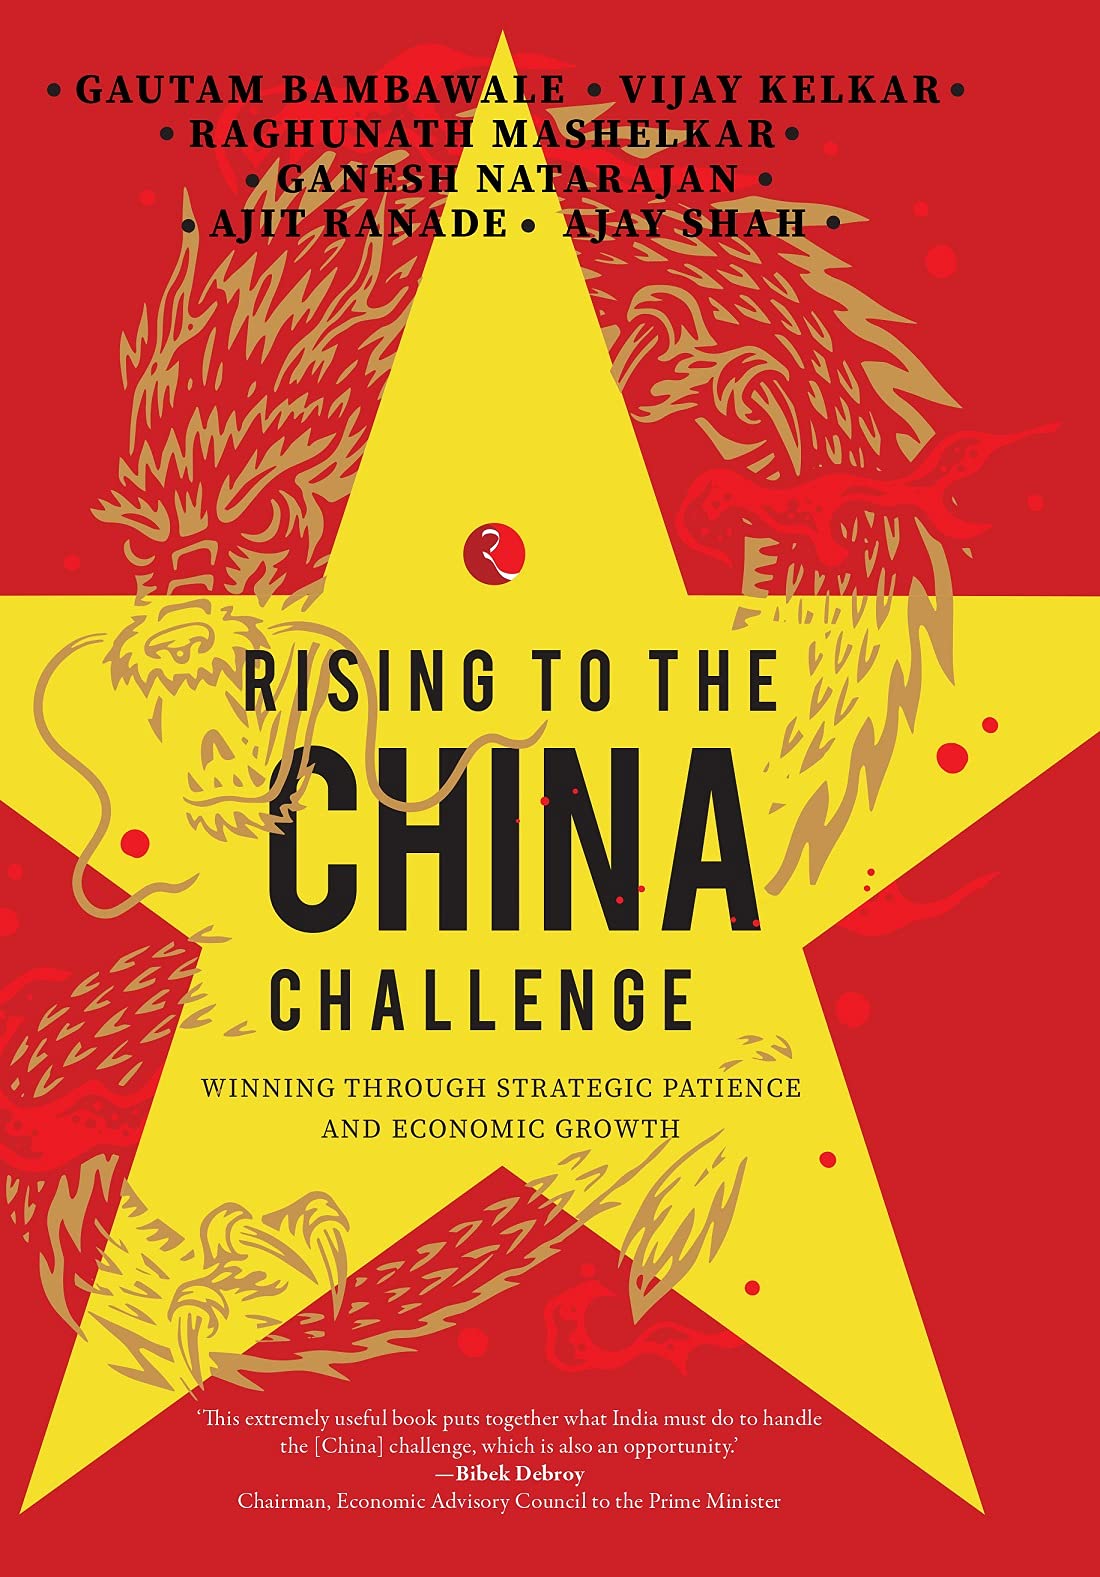 RISING TO THE CHINA CHALLENGE: WINNING THROUGH STRATEGIC PATIENCE AND ECONOMIC GROWTH